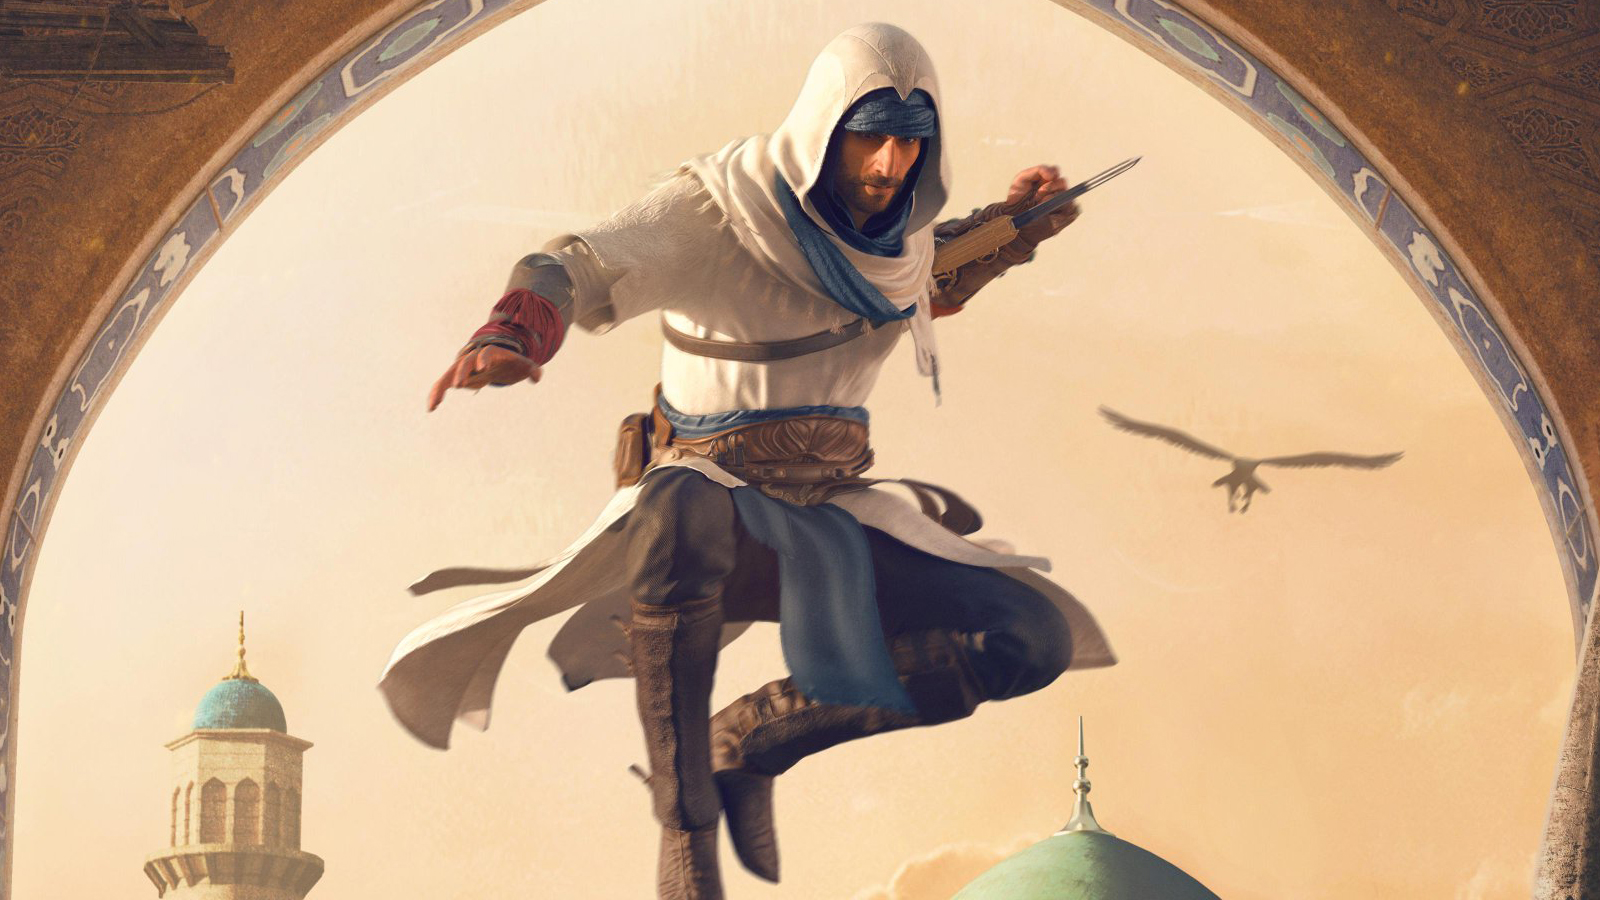 Assassin's Creed Mirage artwork surfaces online